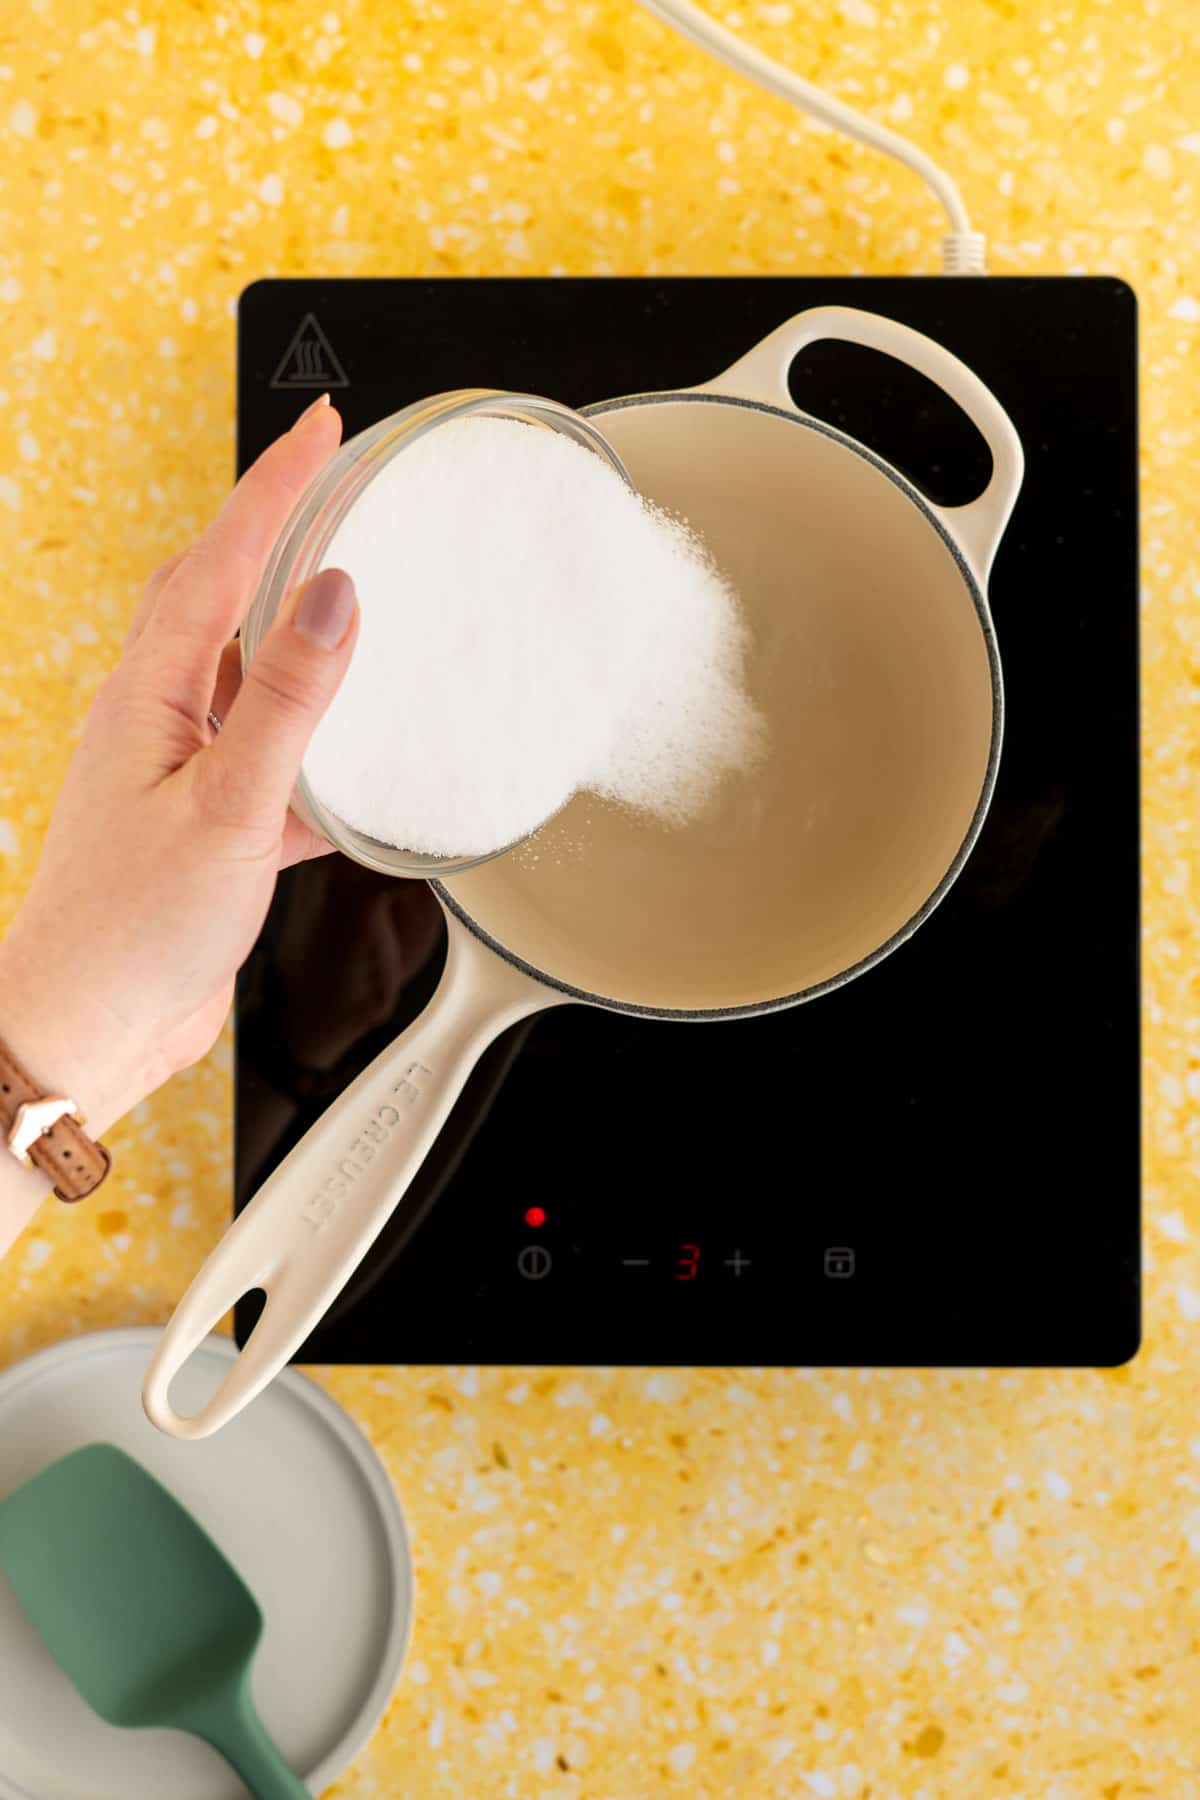 A hand from out of frame is pouring sugar into a saucepan full of water on an induction heat top.